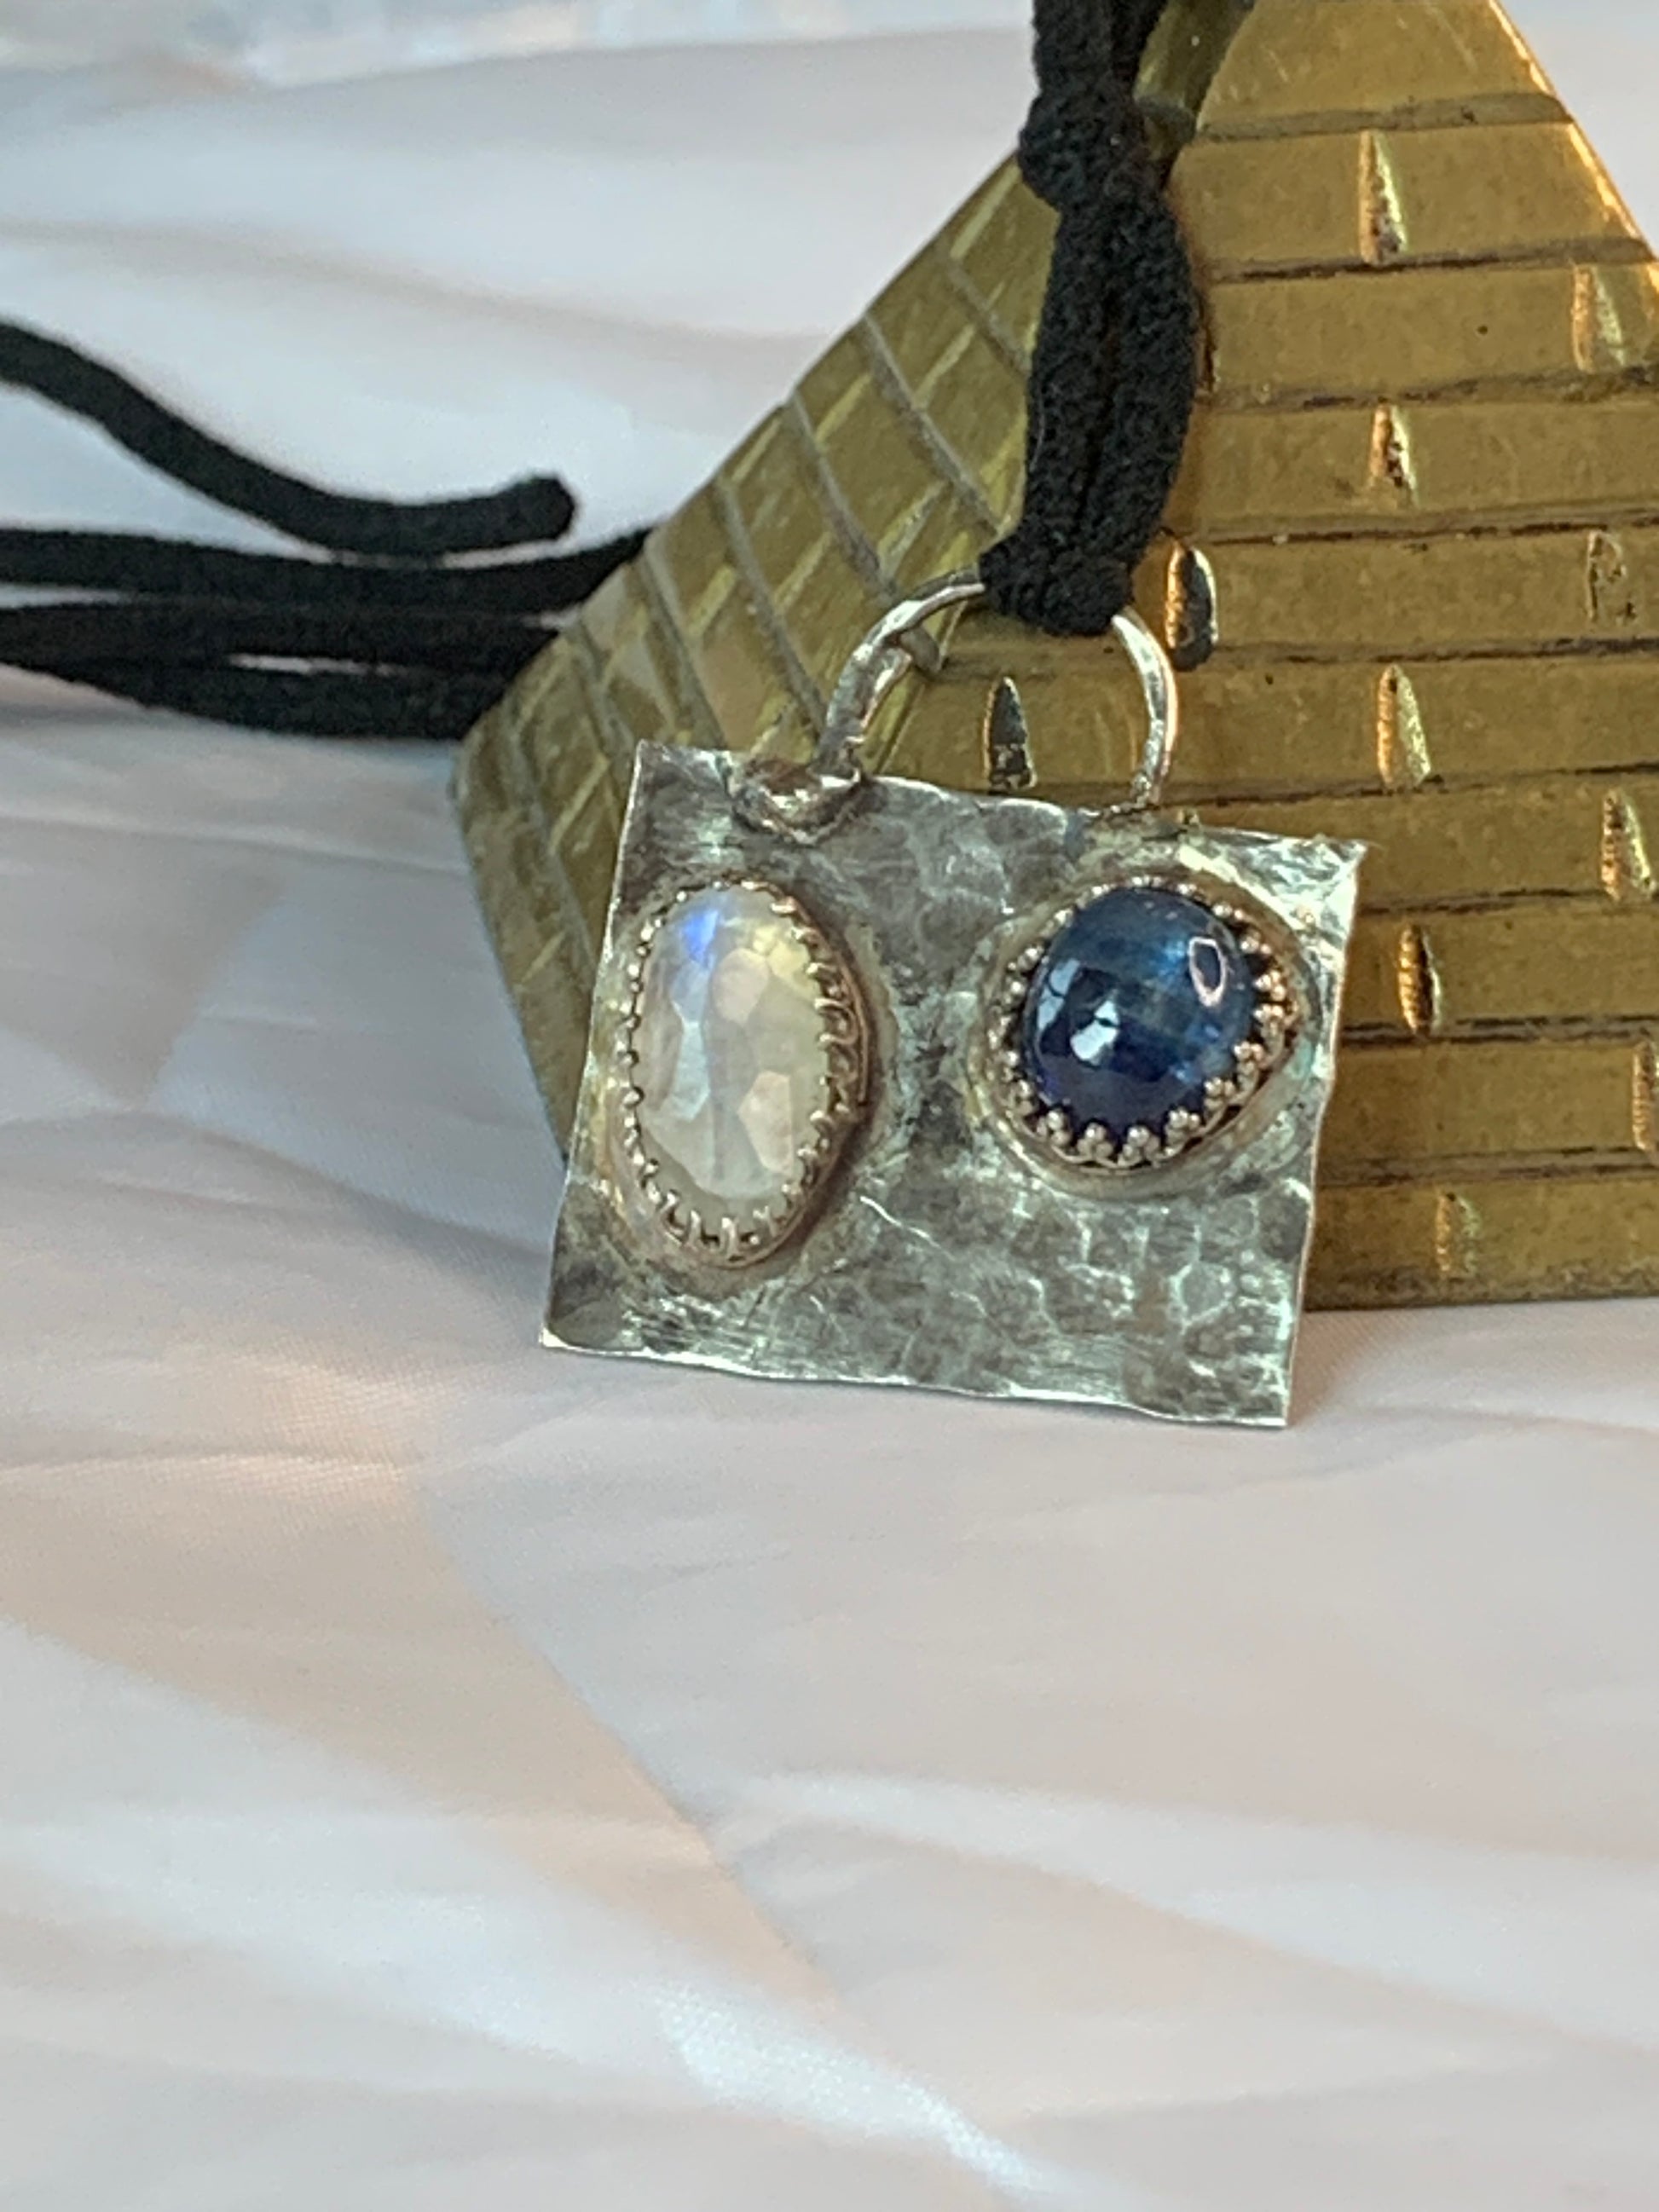 Whether you're looking to embrace the calming energy of gemstones, elevate your style with artisan craftsmanship, or simply make a statement, this pendant is a reflection of your individuality.